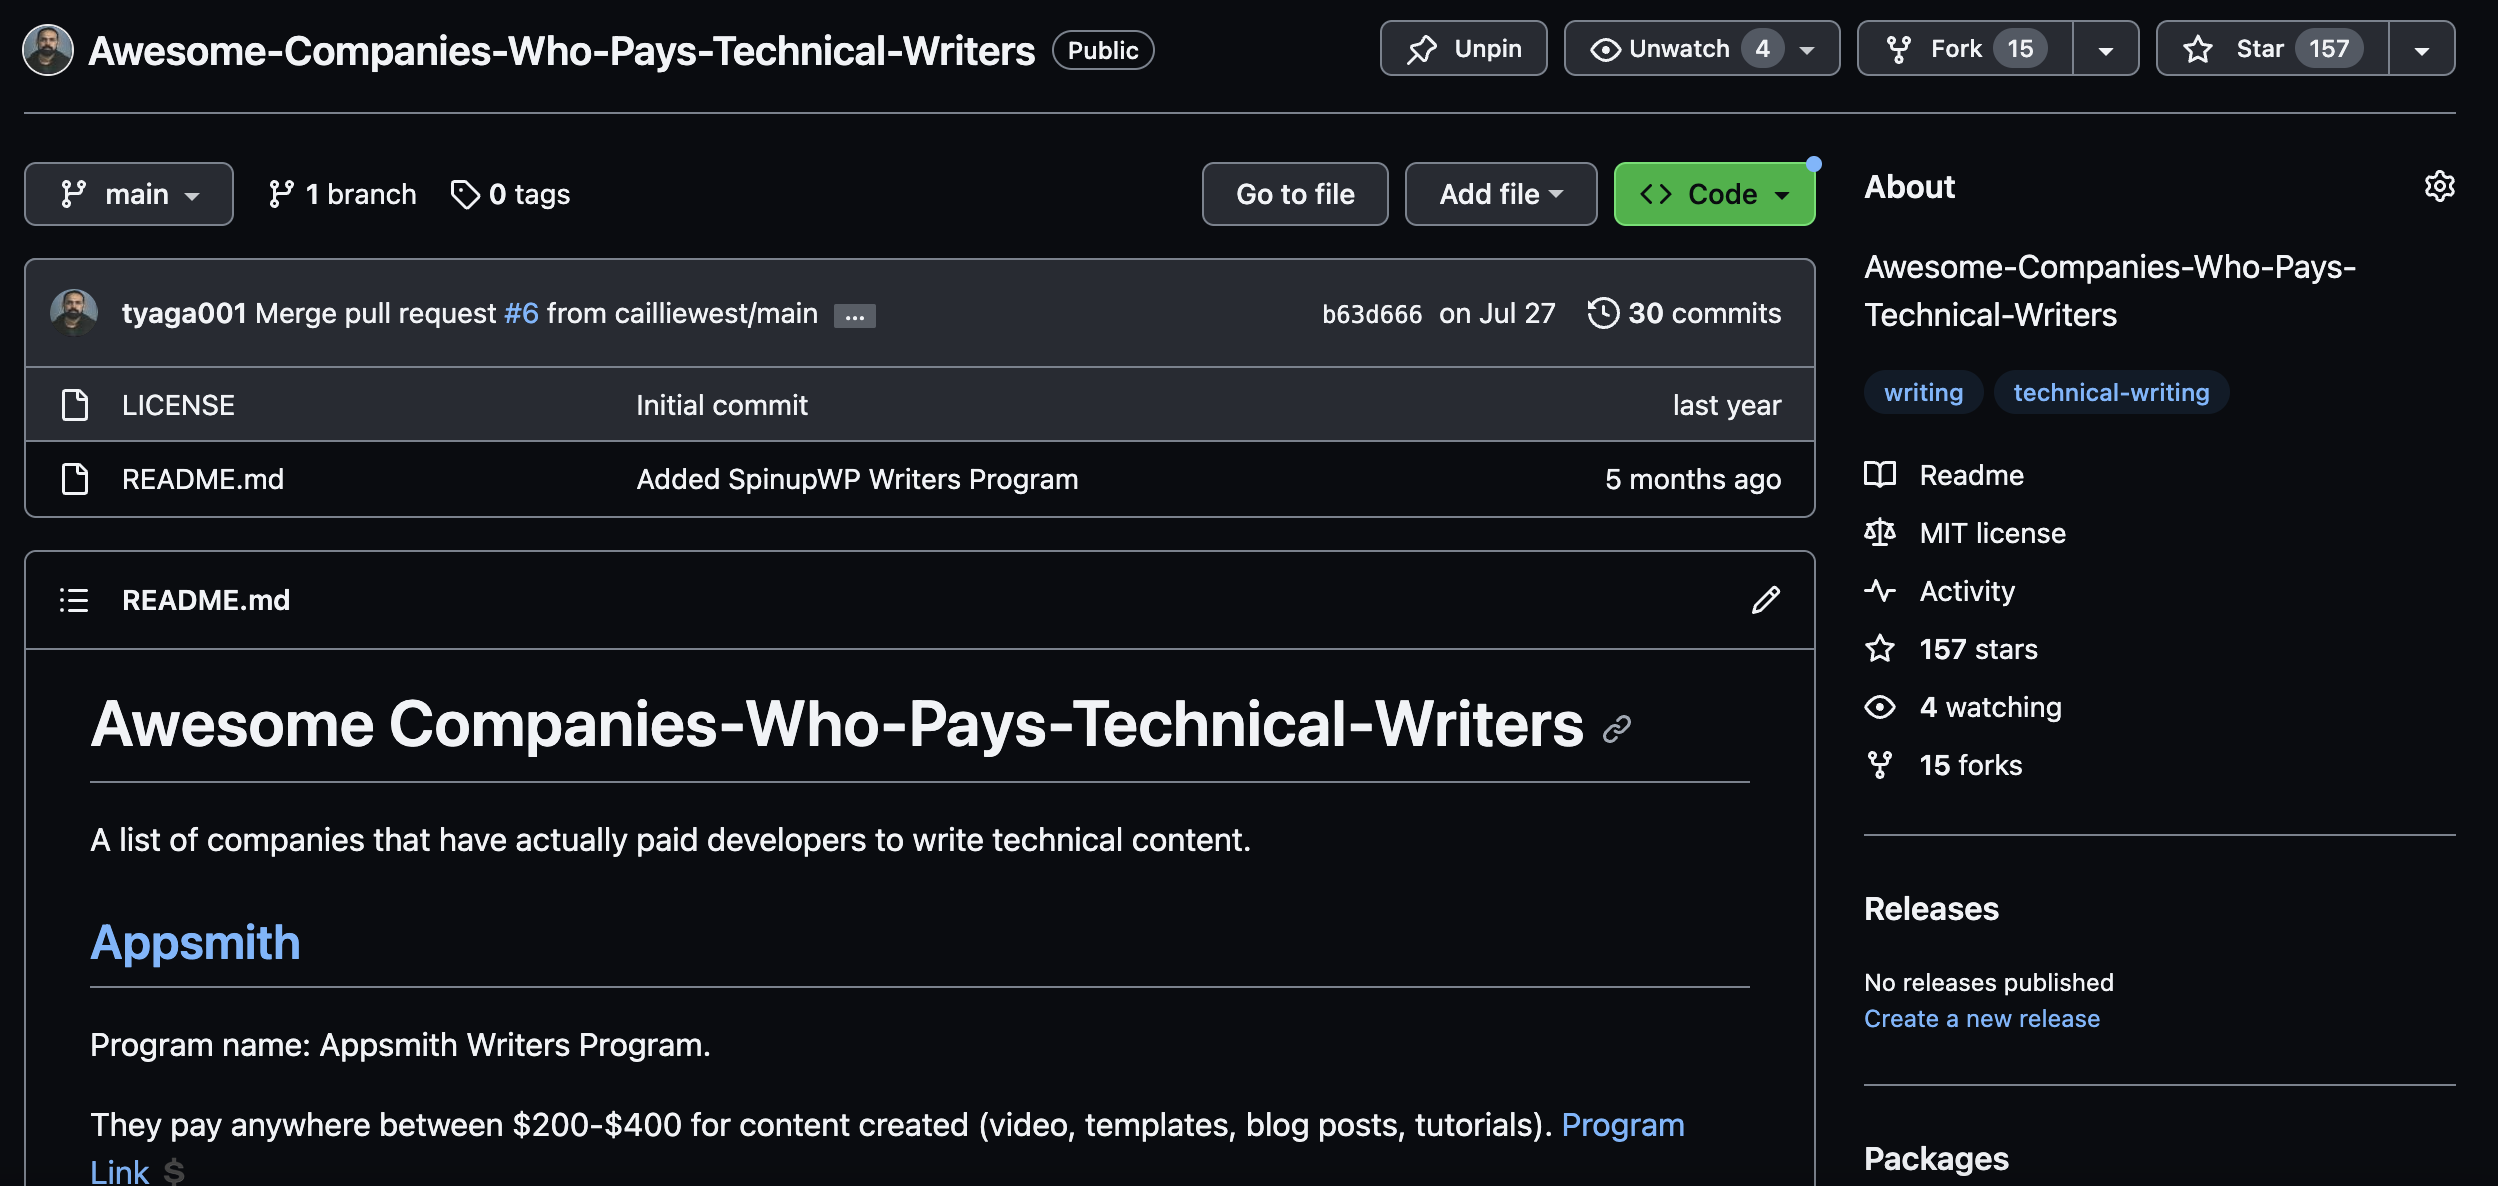 Awesome-Companies-Who-Pays-Technical-Writers